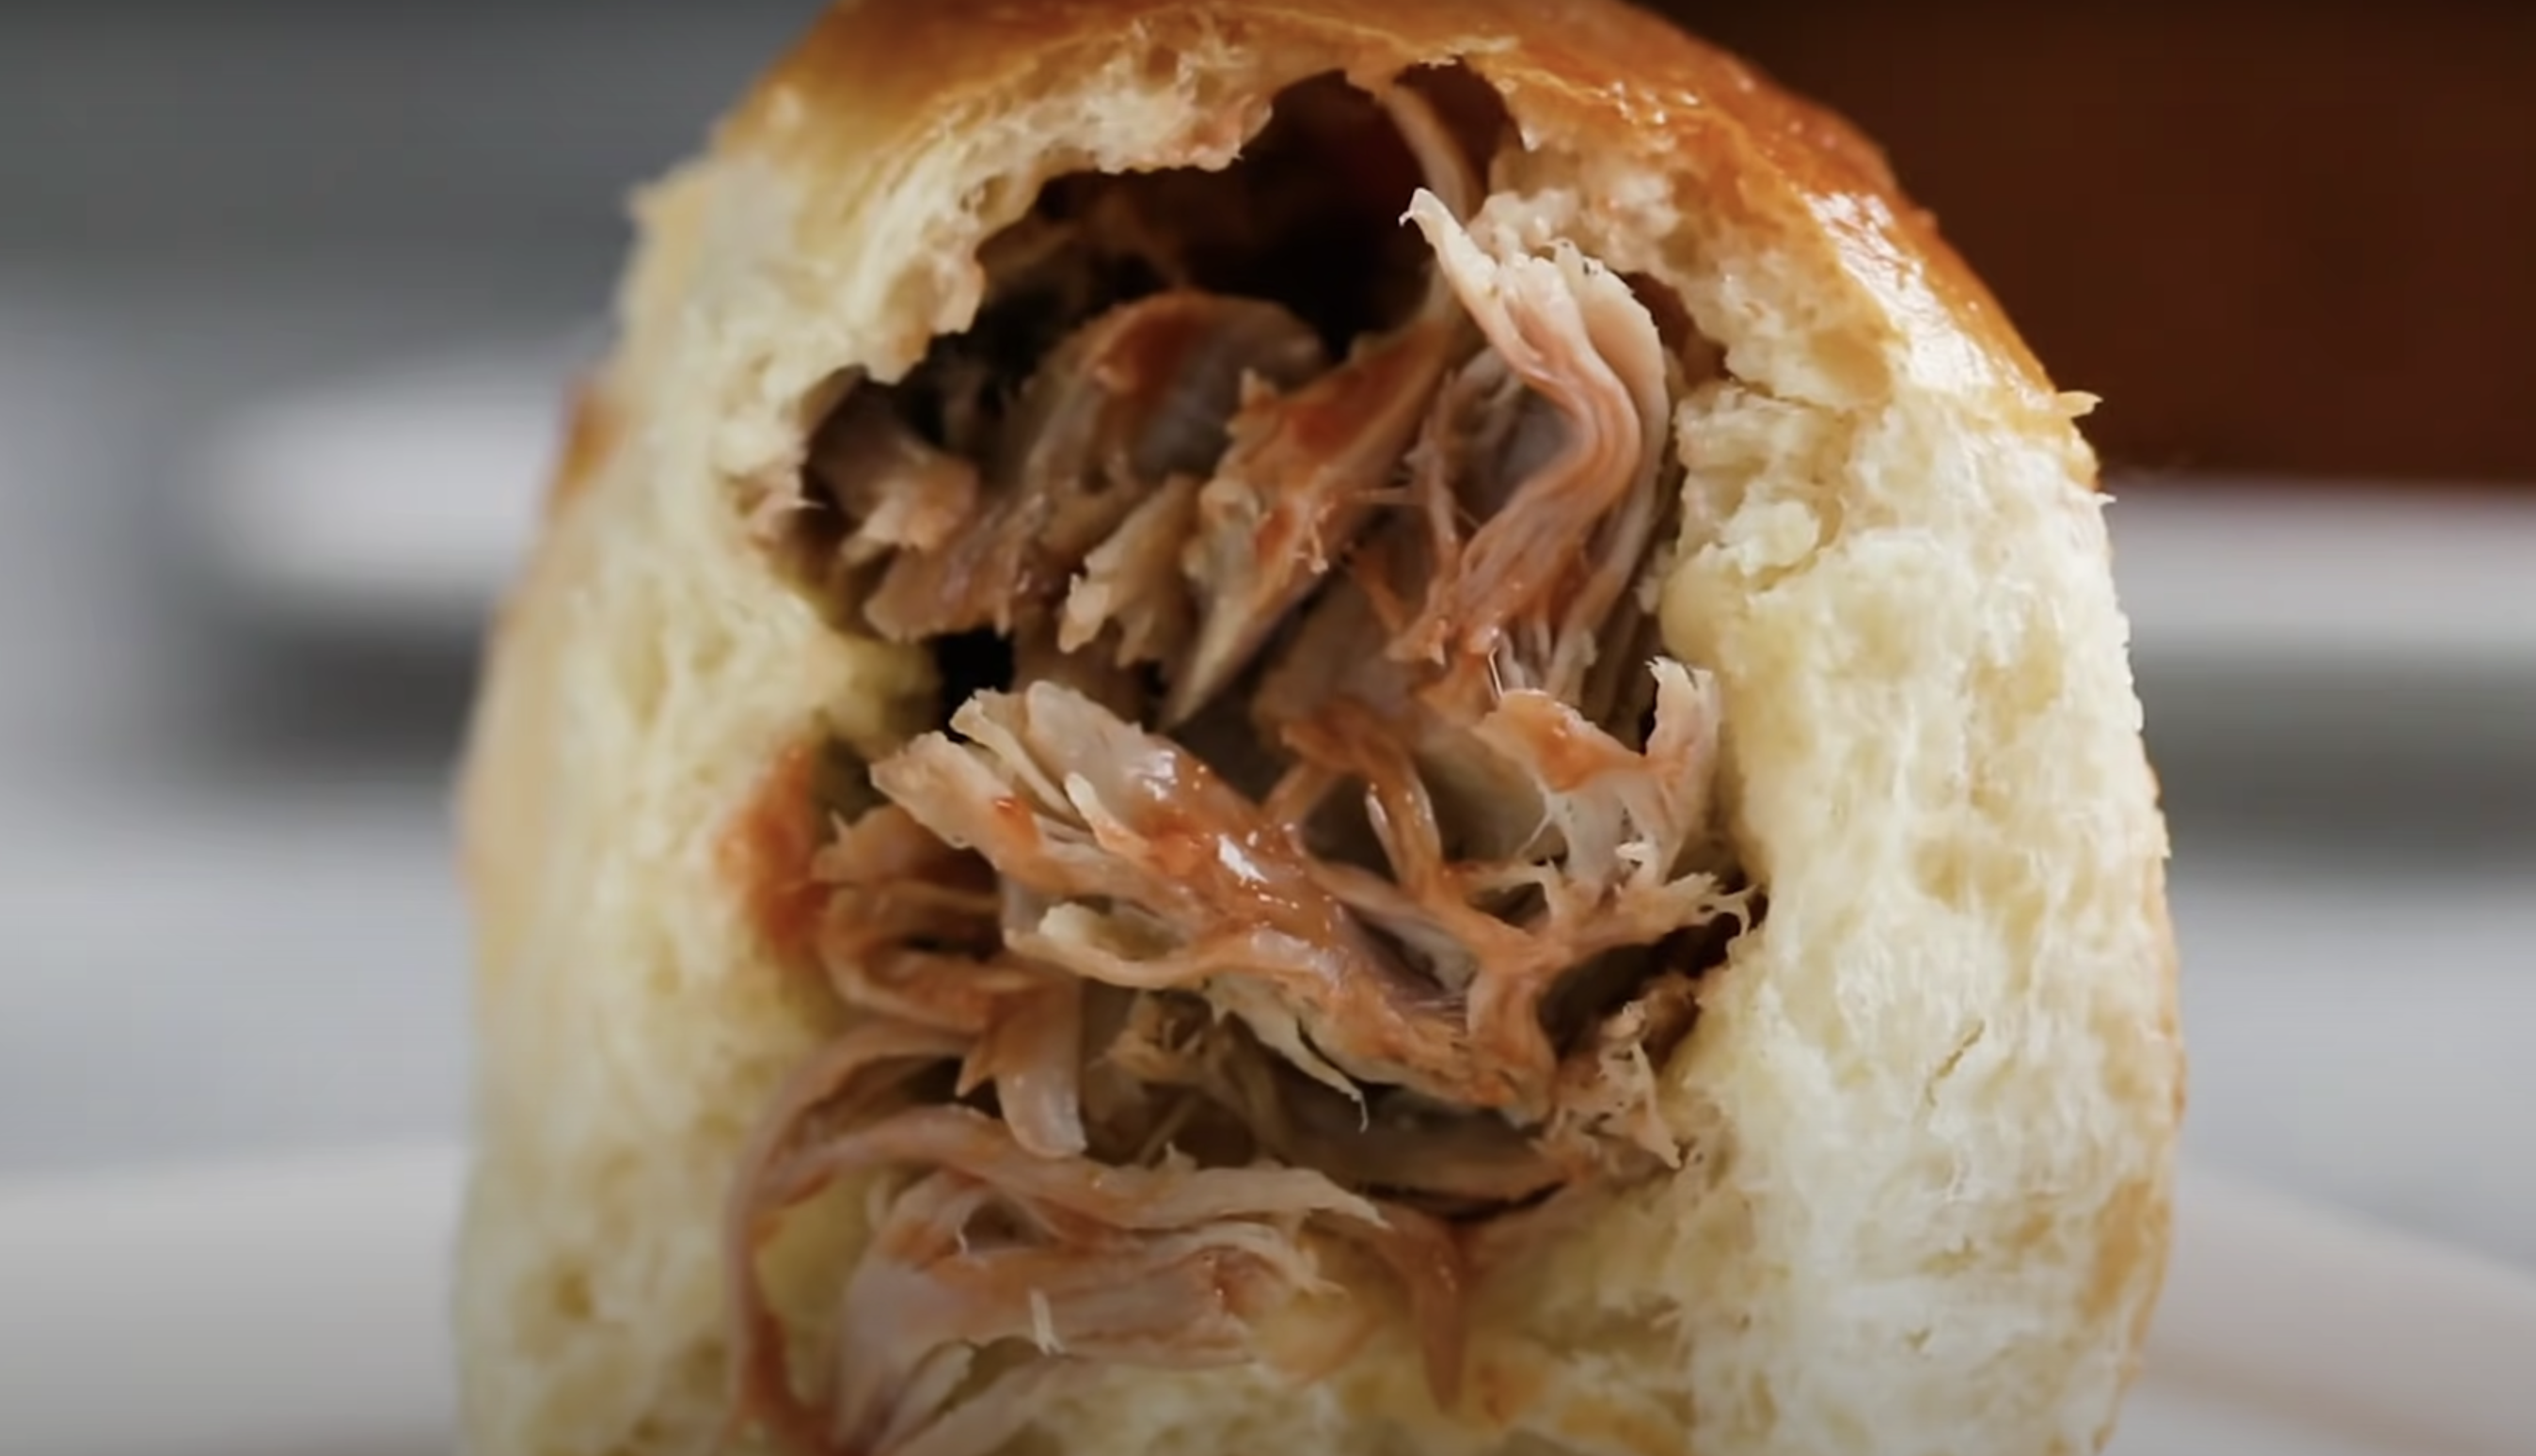 A milk bun pulled in half showing the pulled pork filling.